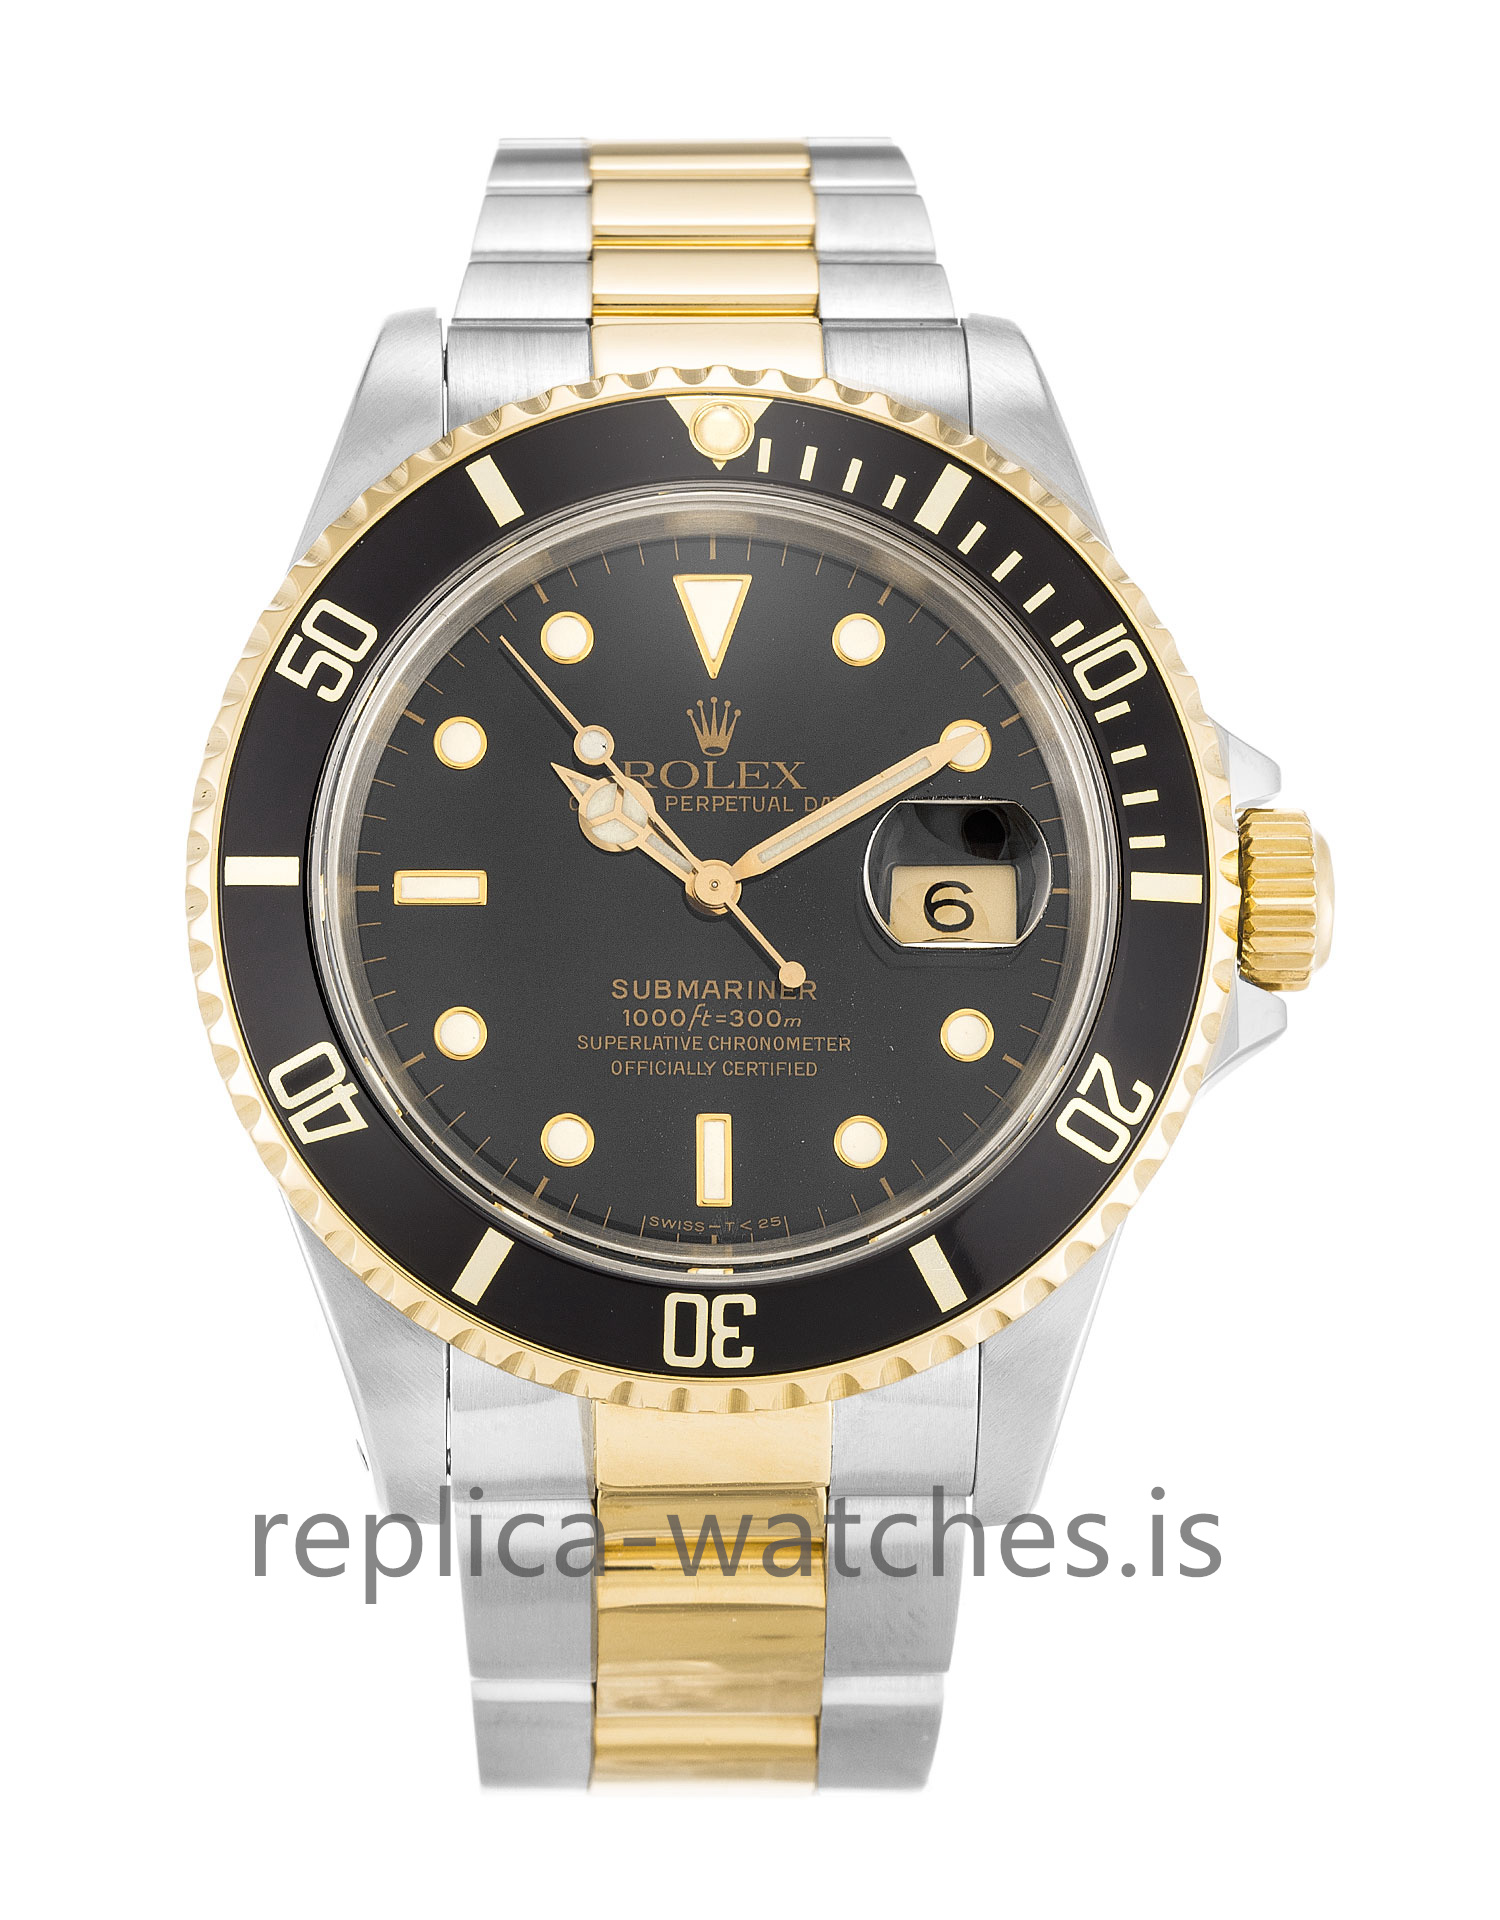 reproduction rolex watches knock off watches china